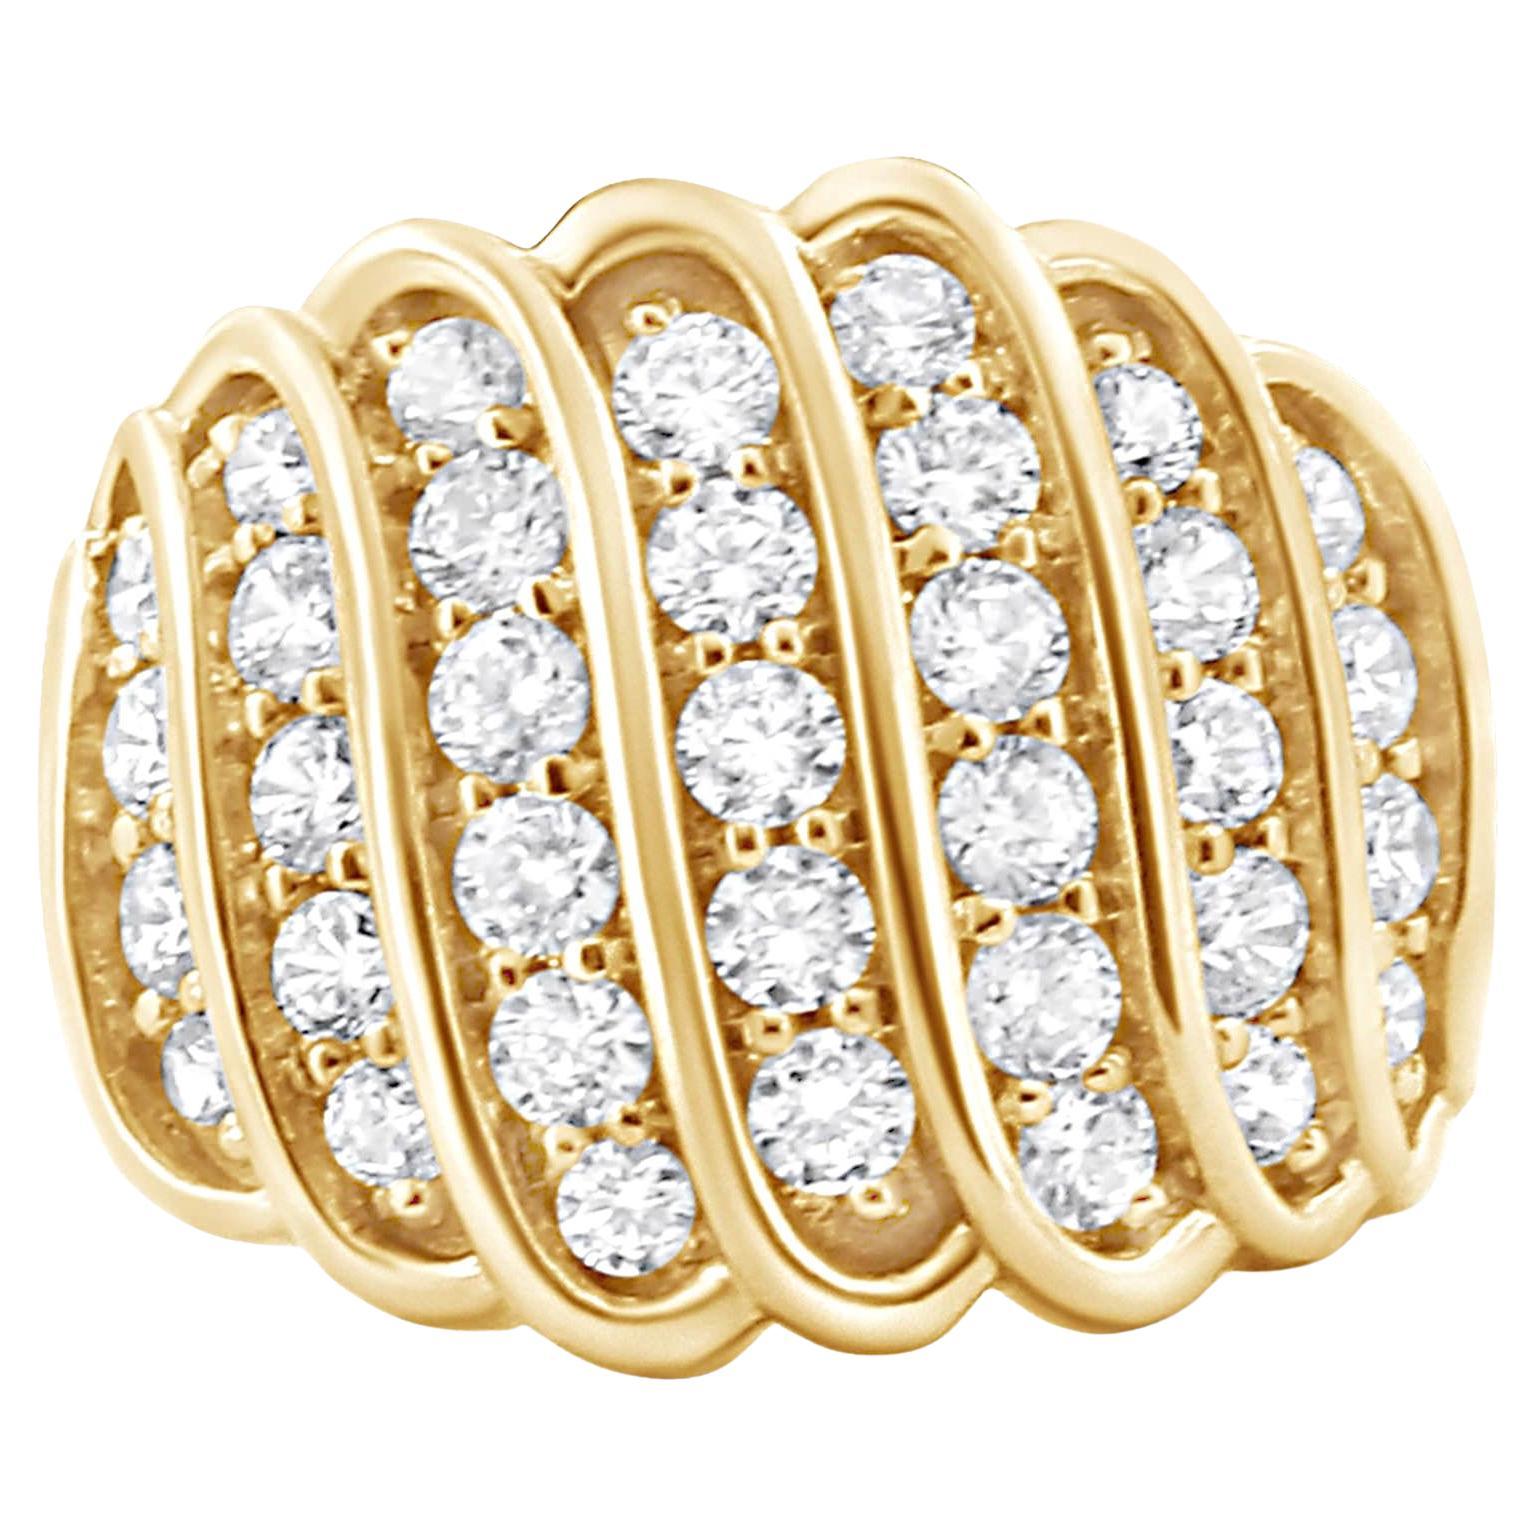 Diamond Wide Cocktail Ring Round Brilliant Cut 2 Carats 14K Yellow Gold Plated